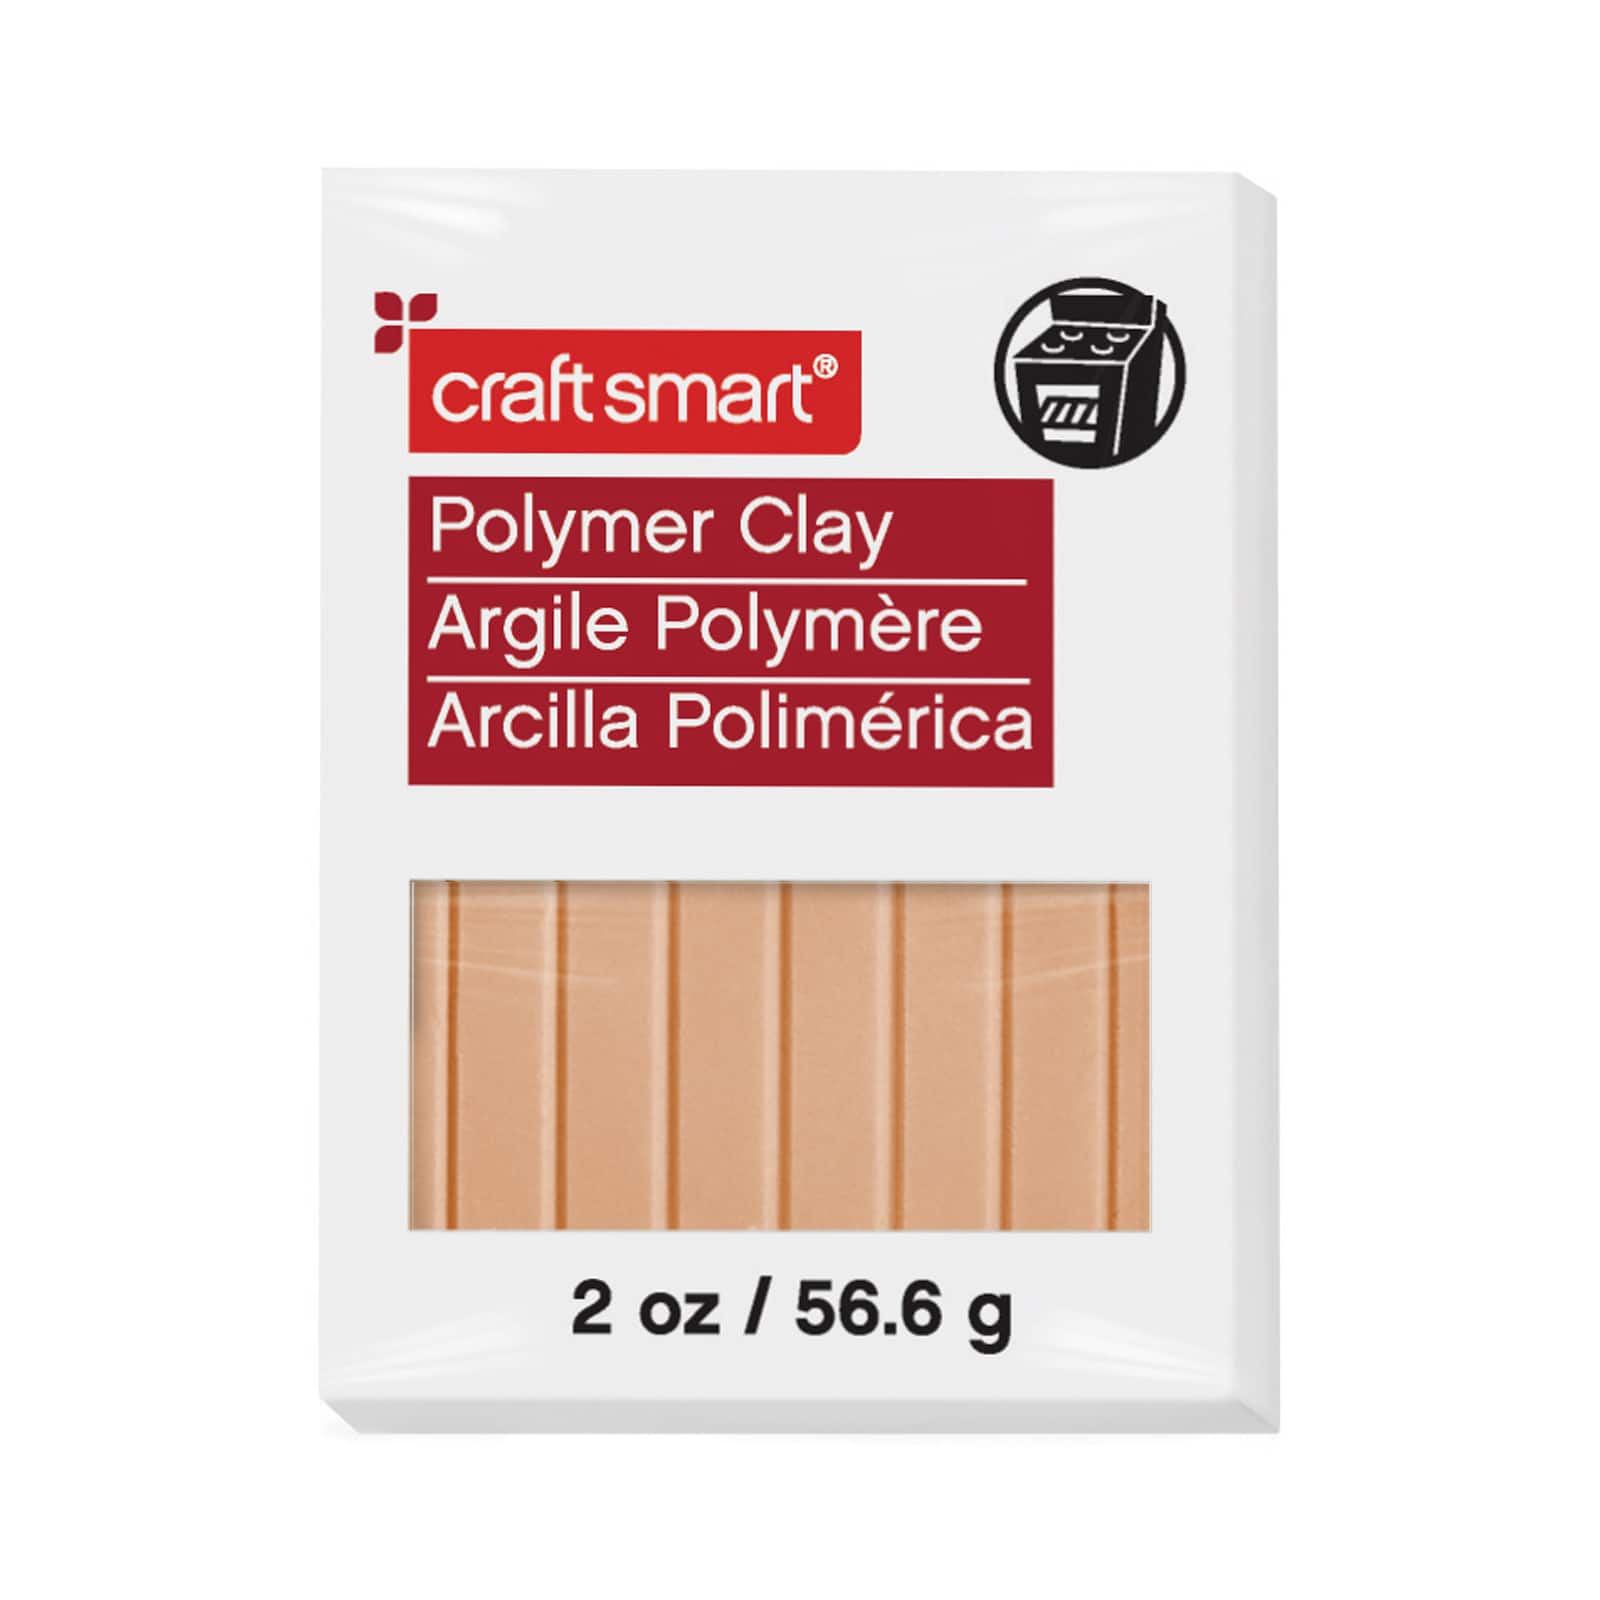 6 Pack: 3lb. White Oven-Bake Polymer Clay by Craft Smart®